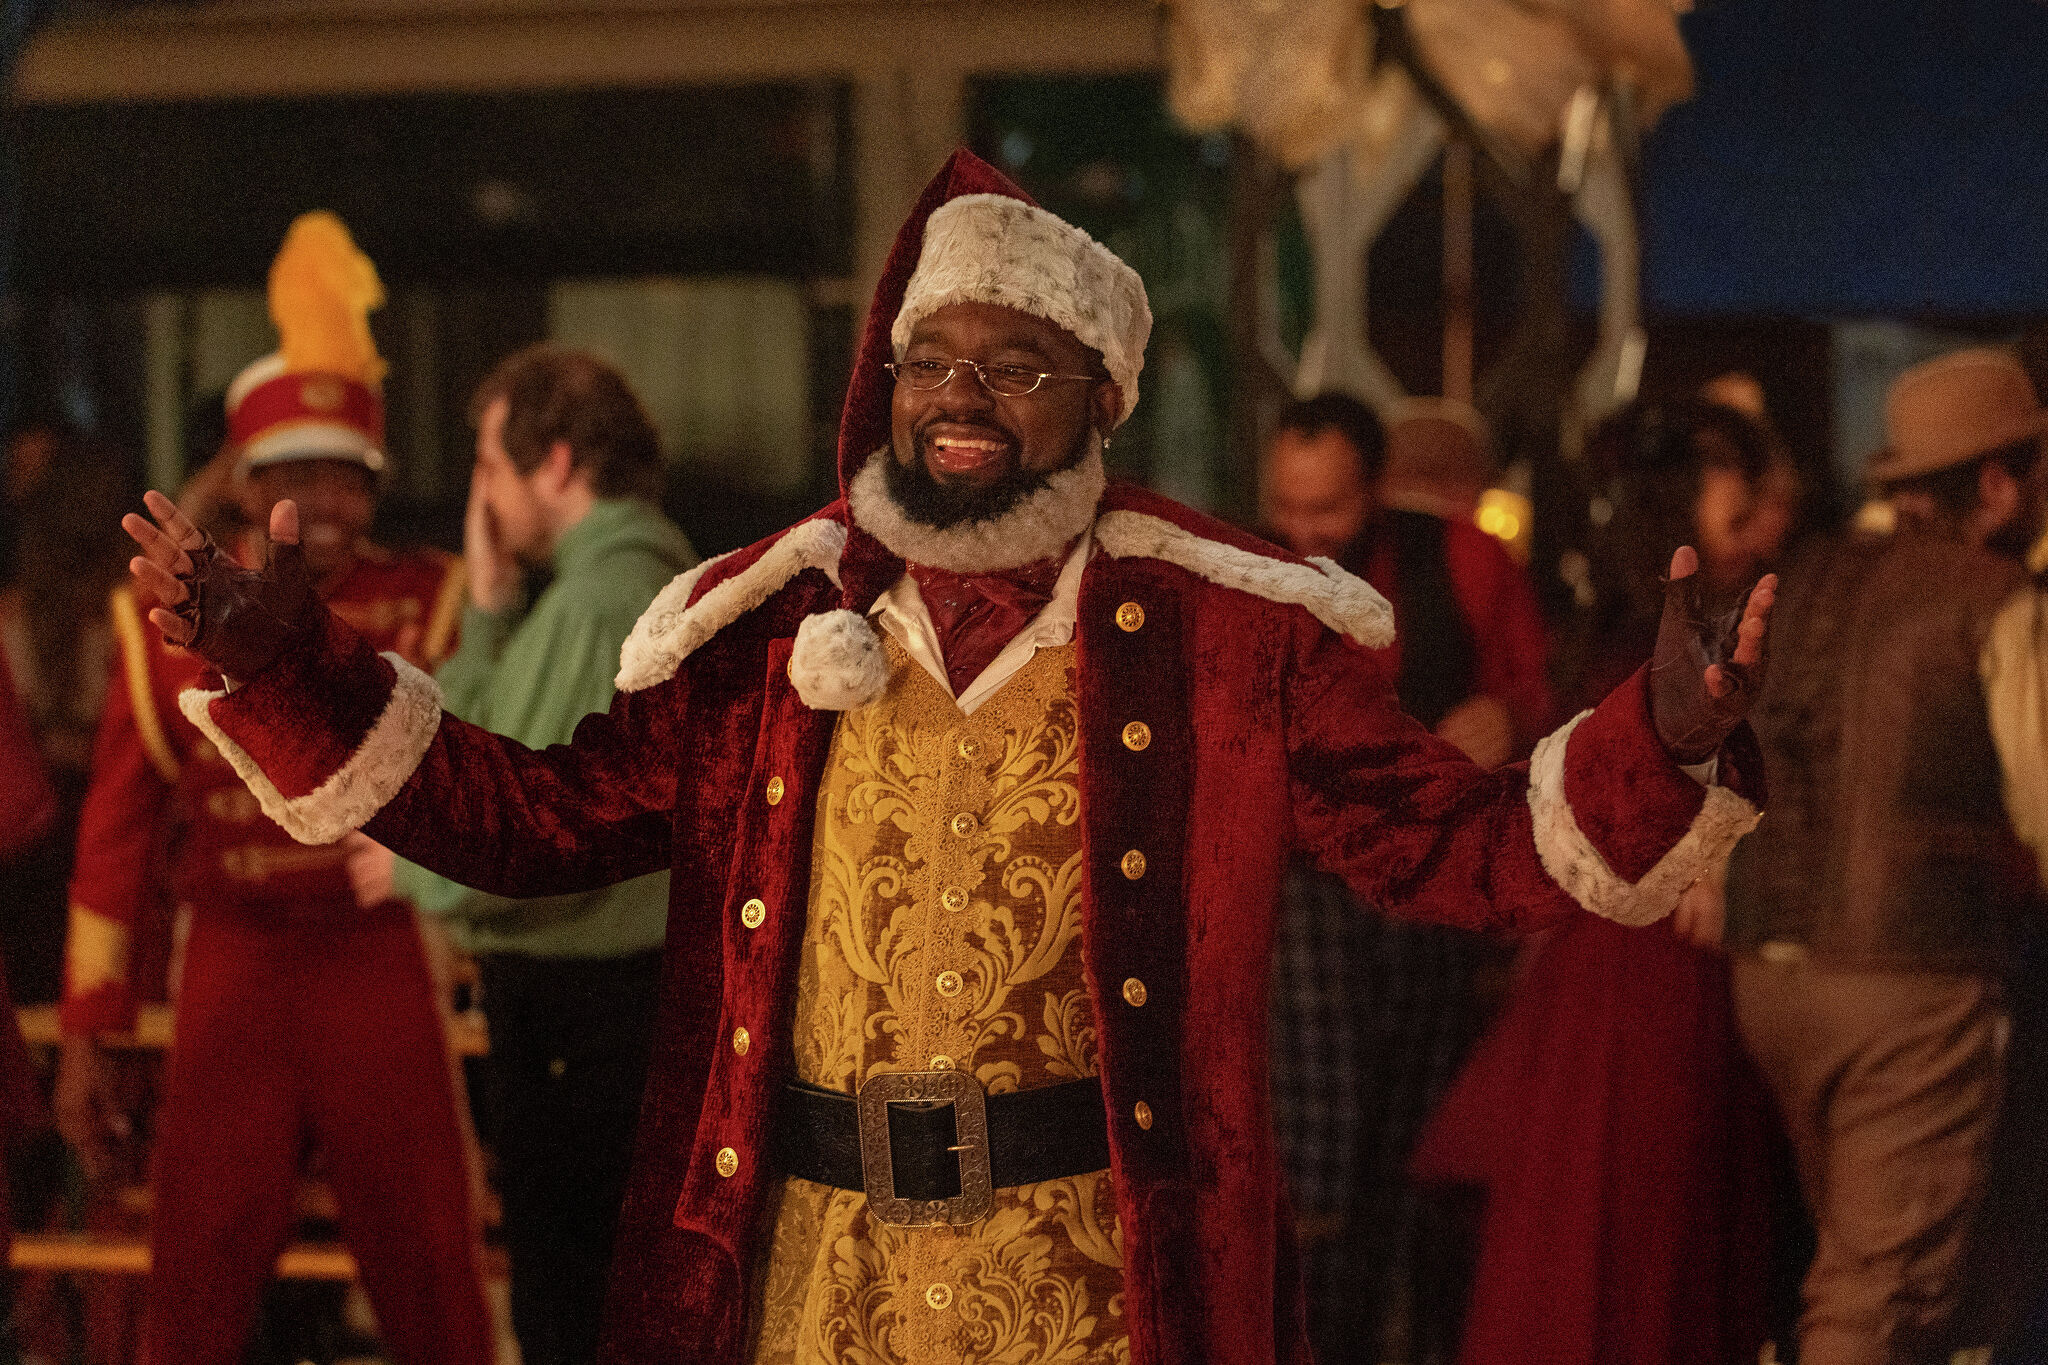 The 20 Best New Christmas Movies Coming Out This Year